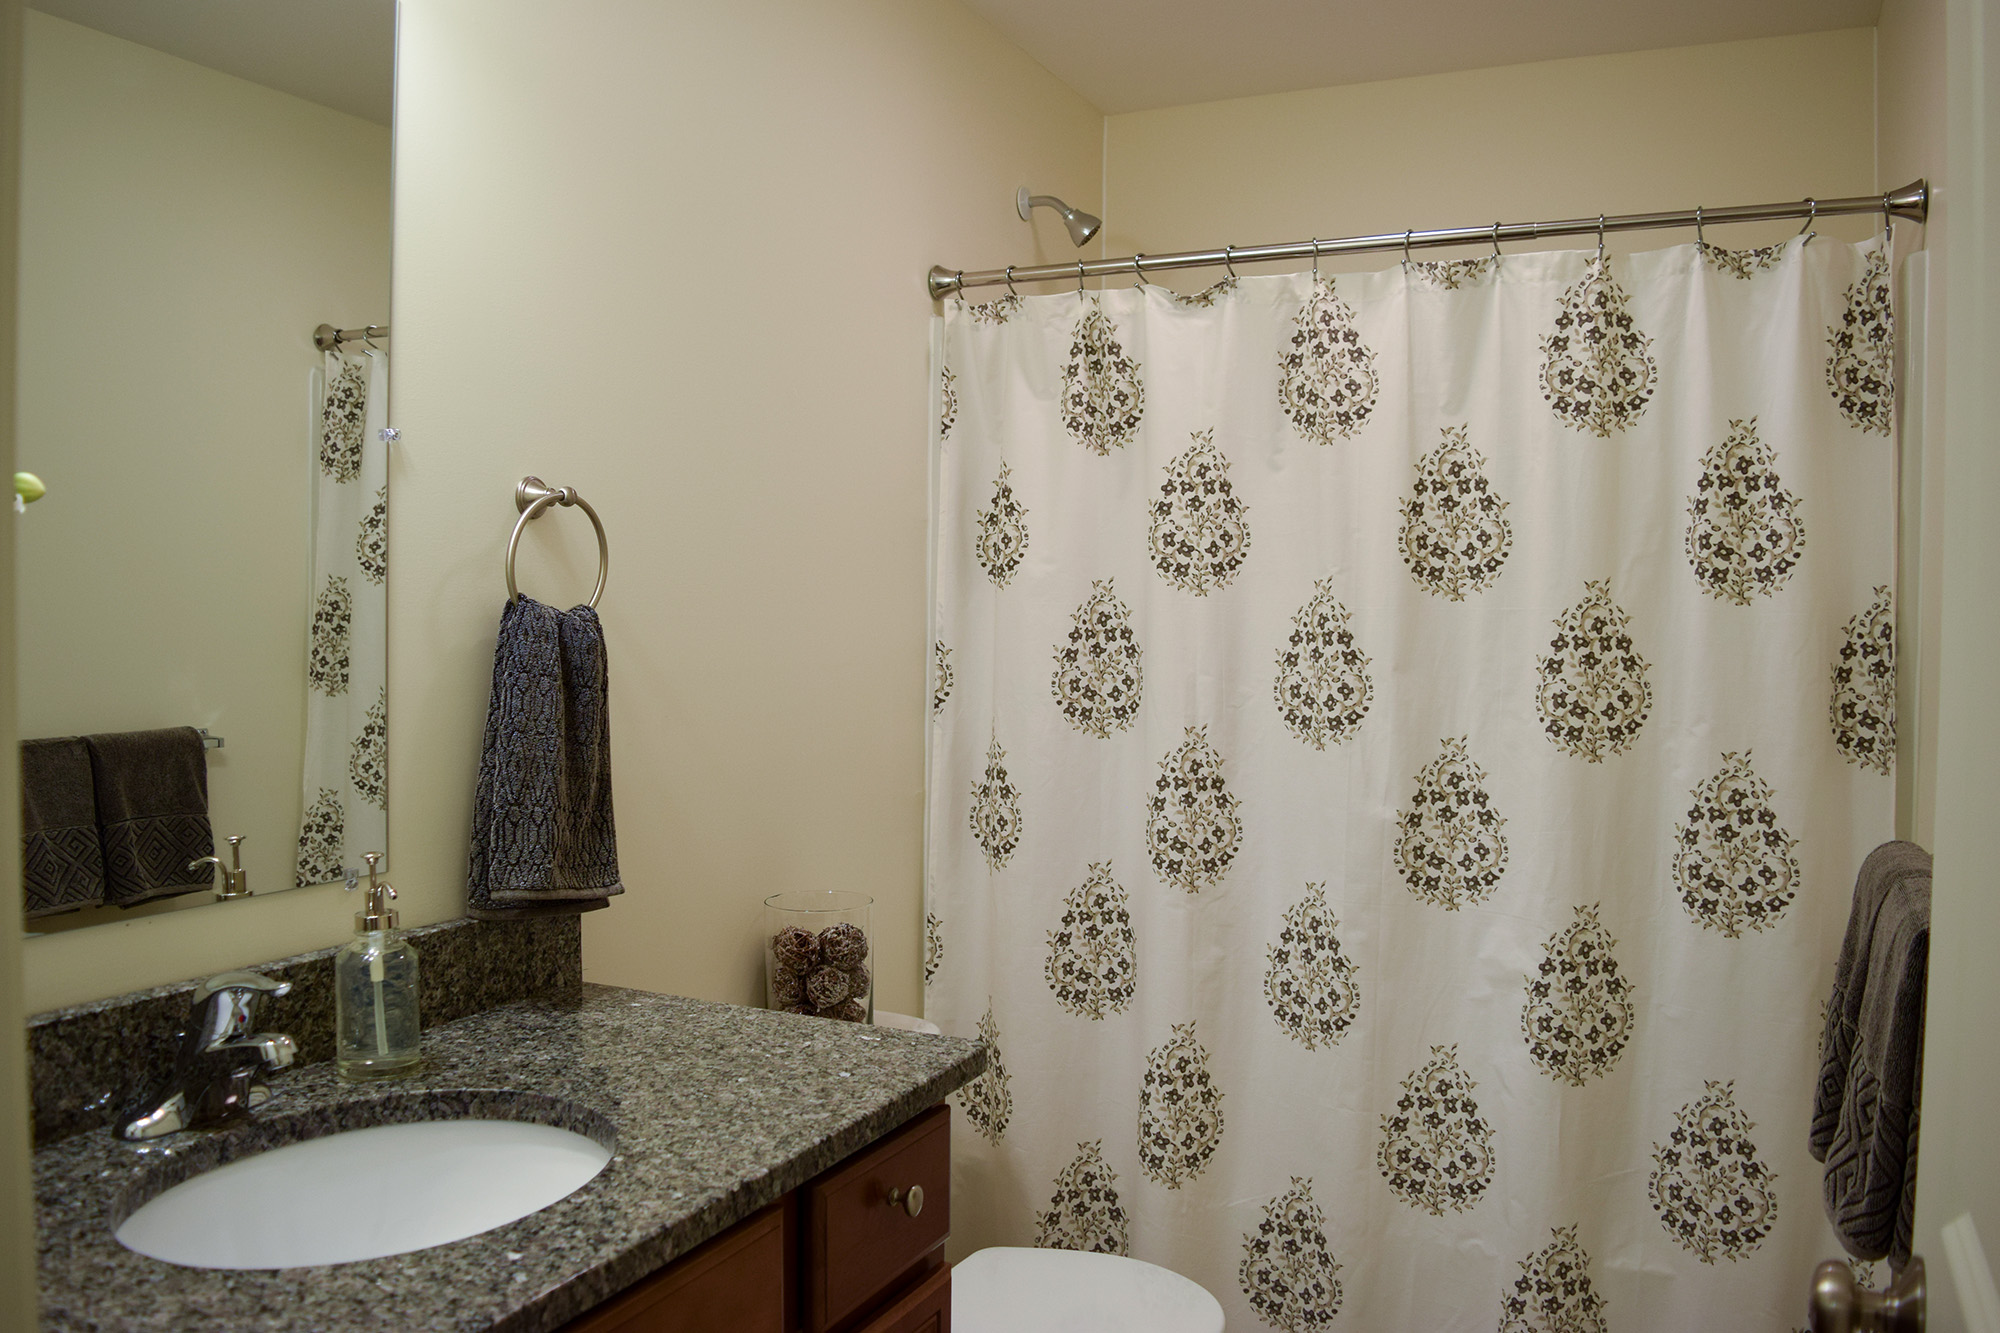 Evergreen Way full bath by Socha Companies is a quality townhouse community in Manchester, NH